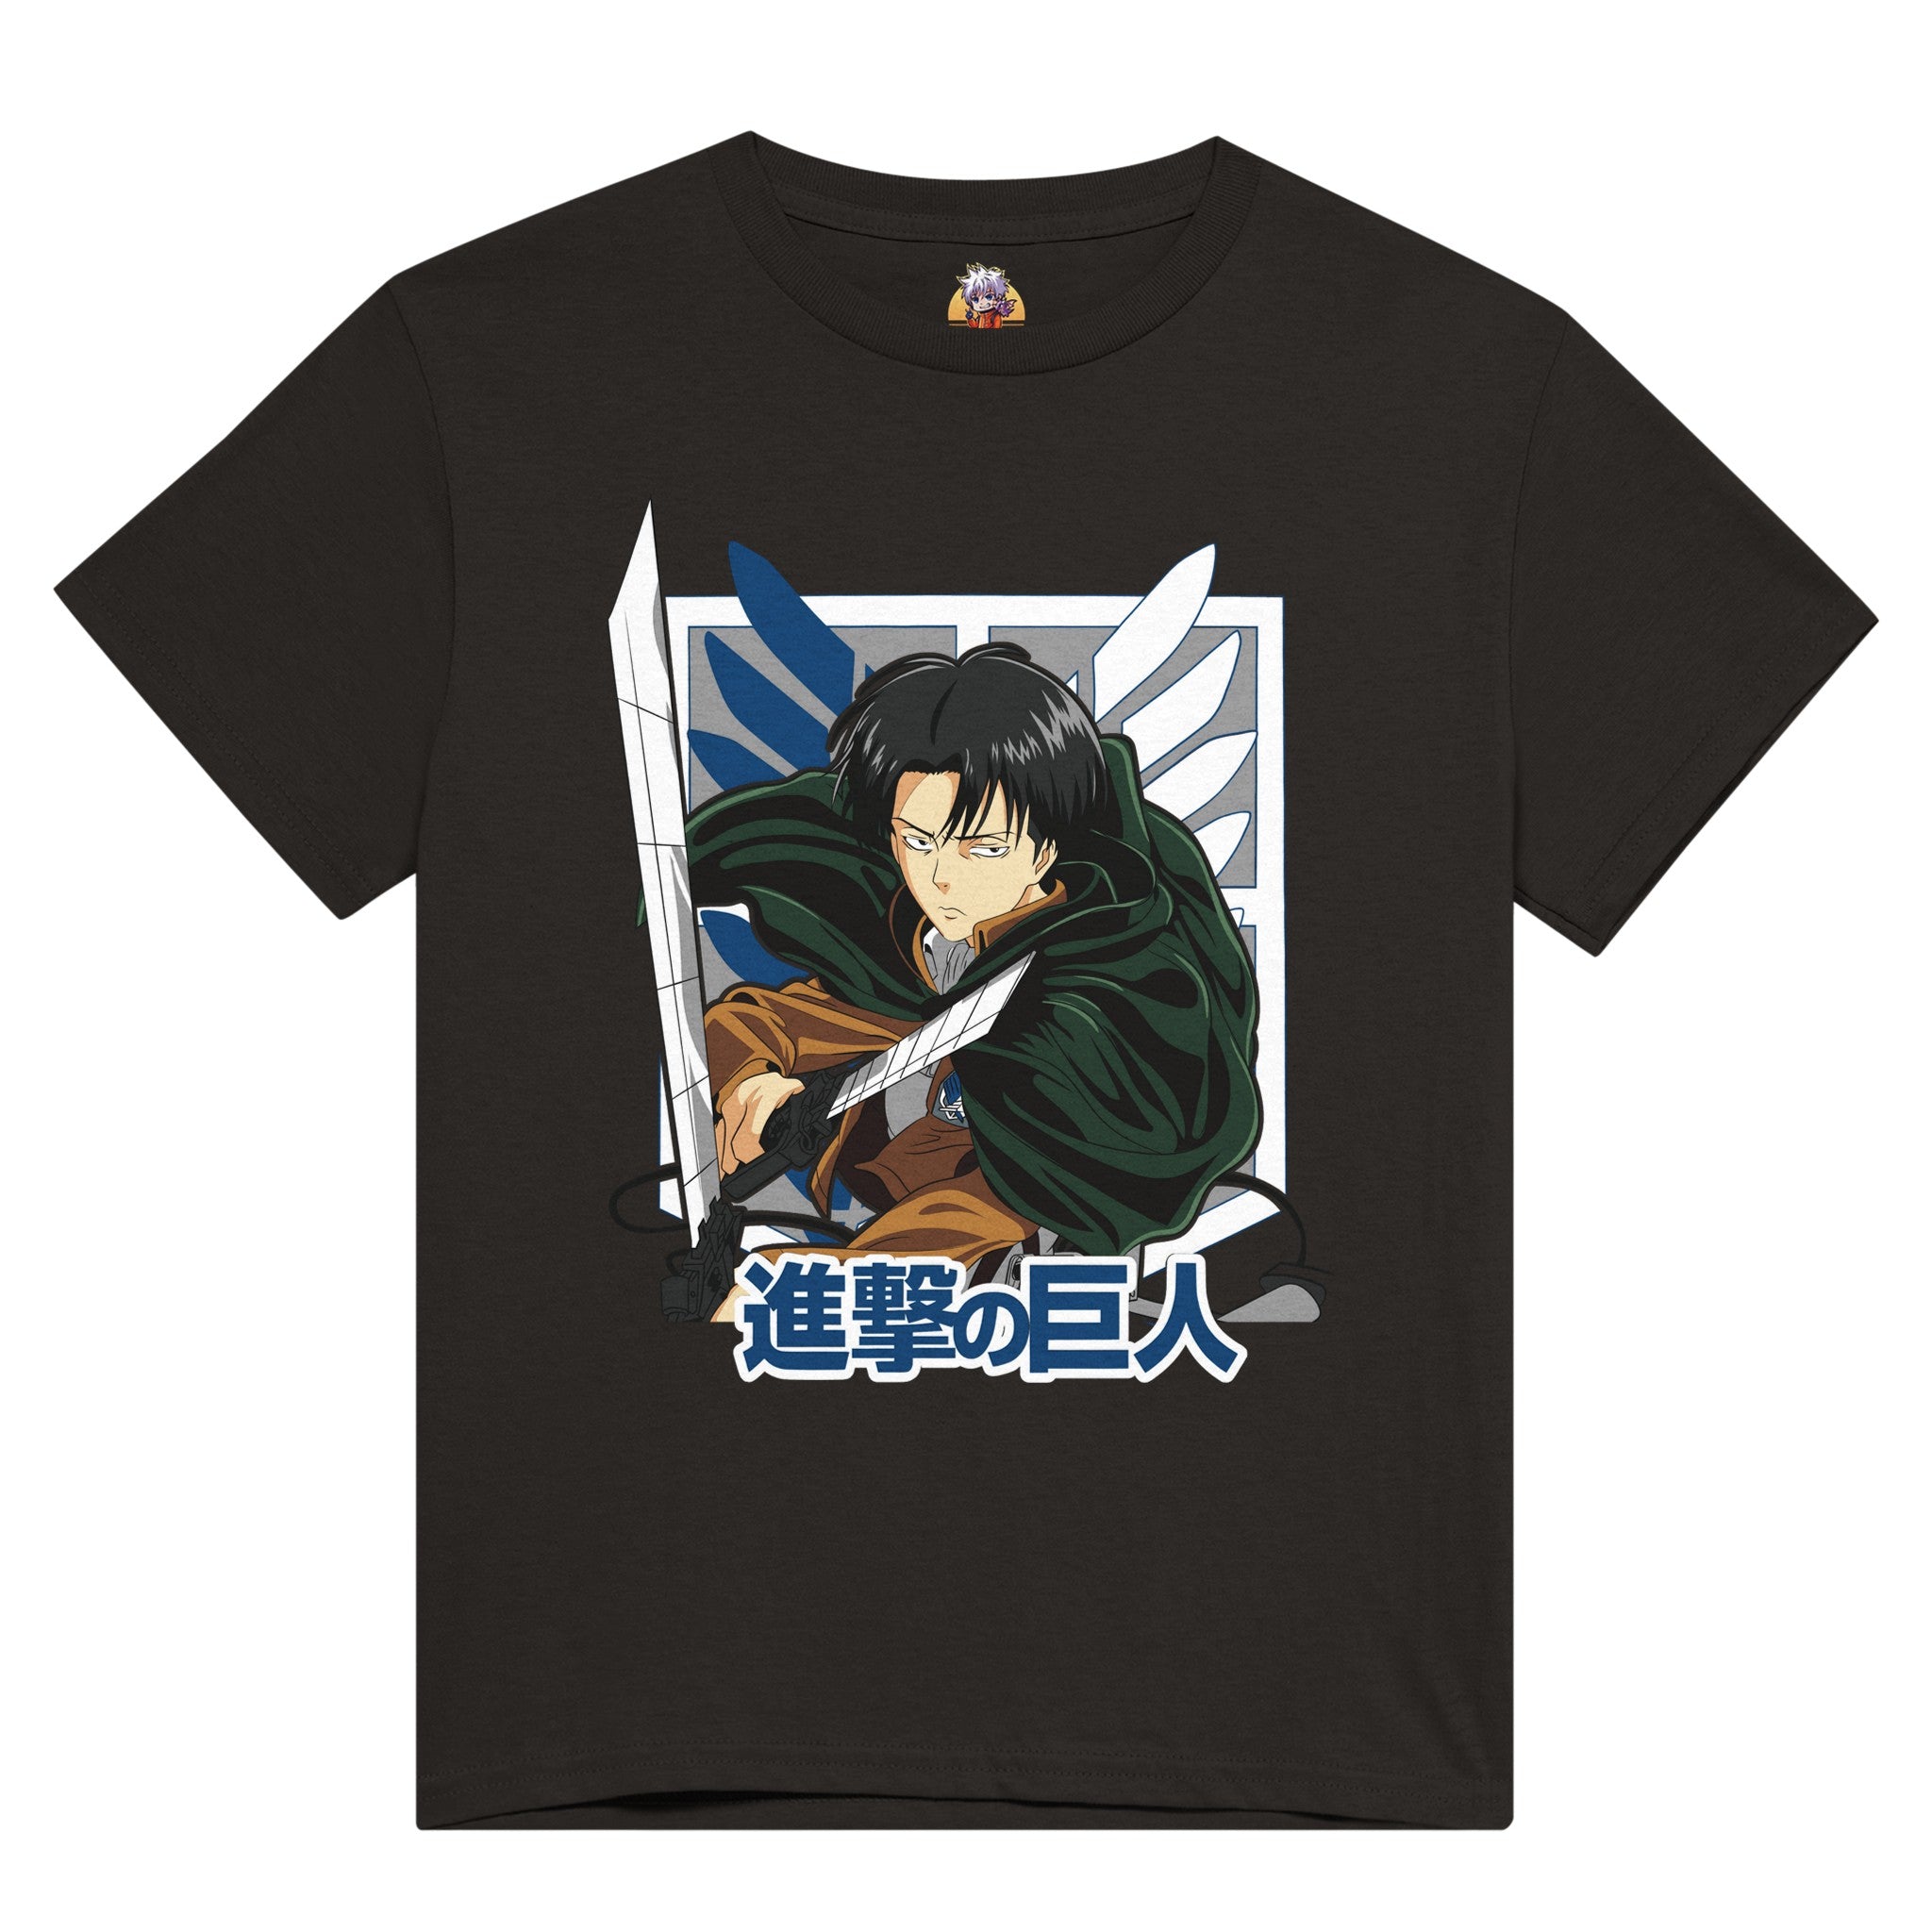 shop and buy attack on titan anime clothing levi ackerman t-shirt